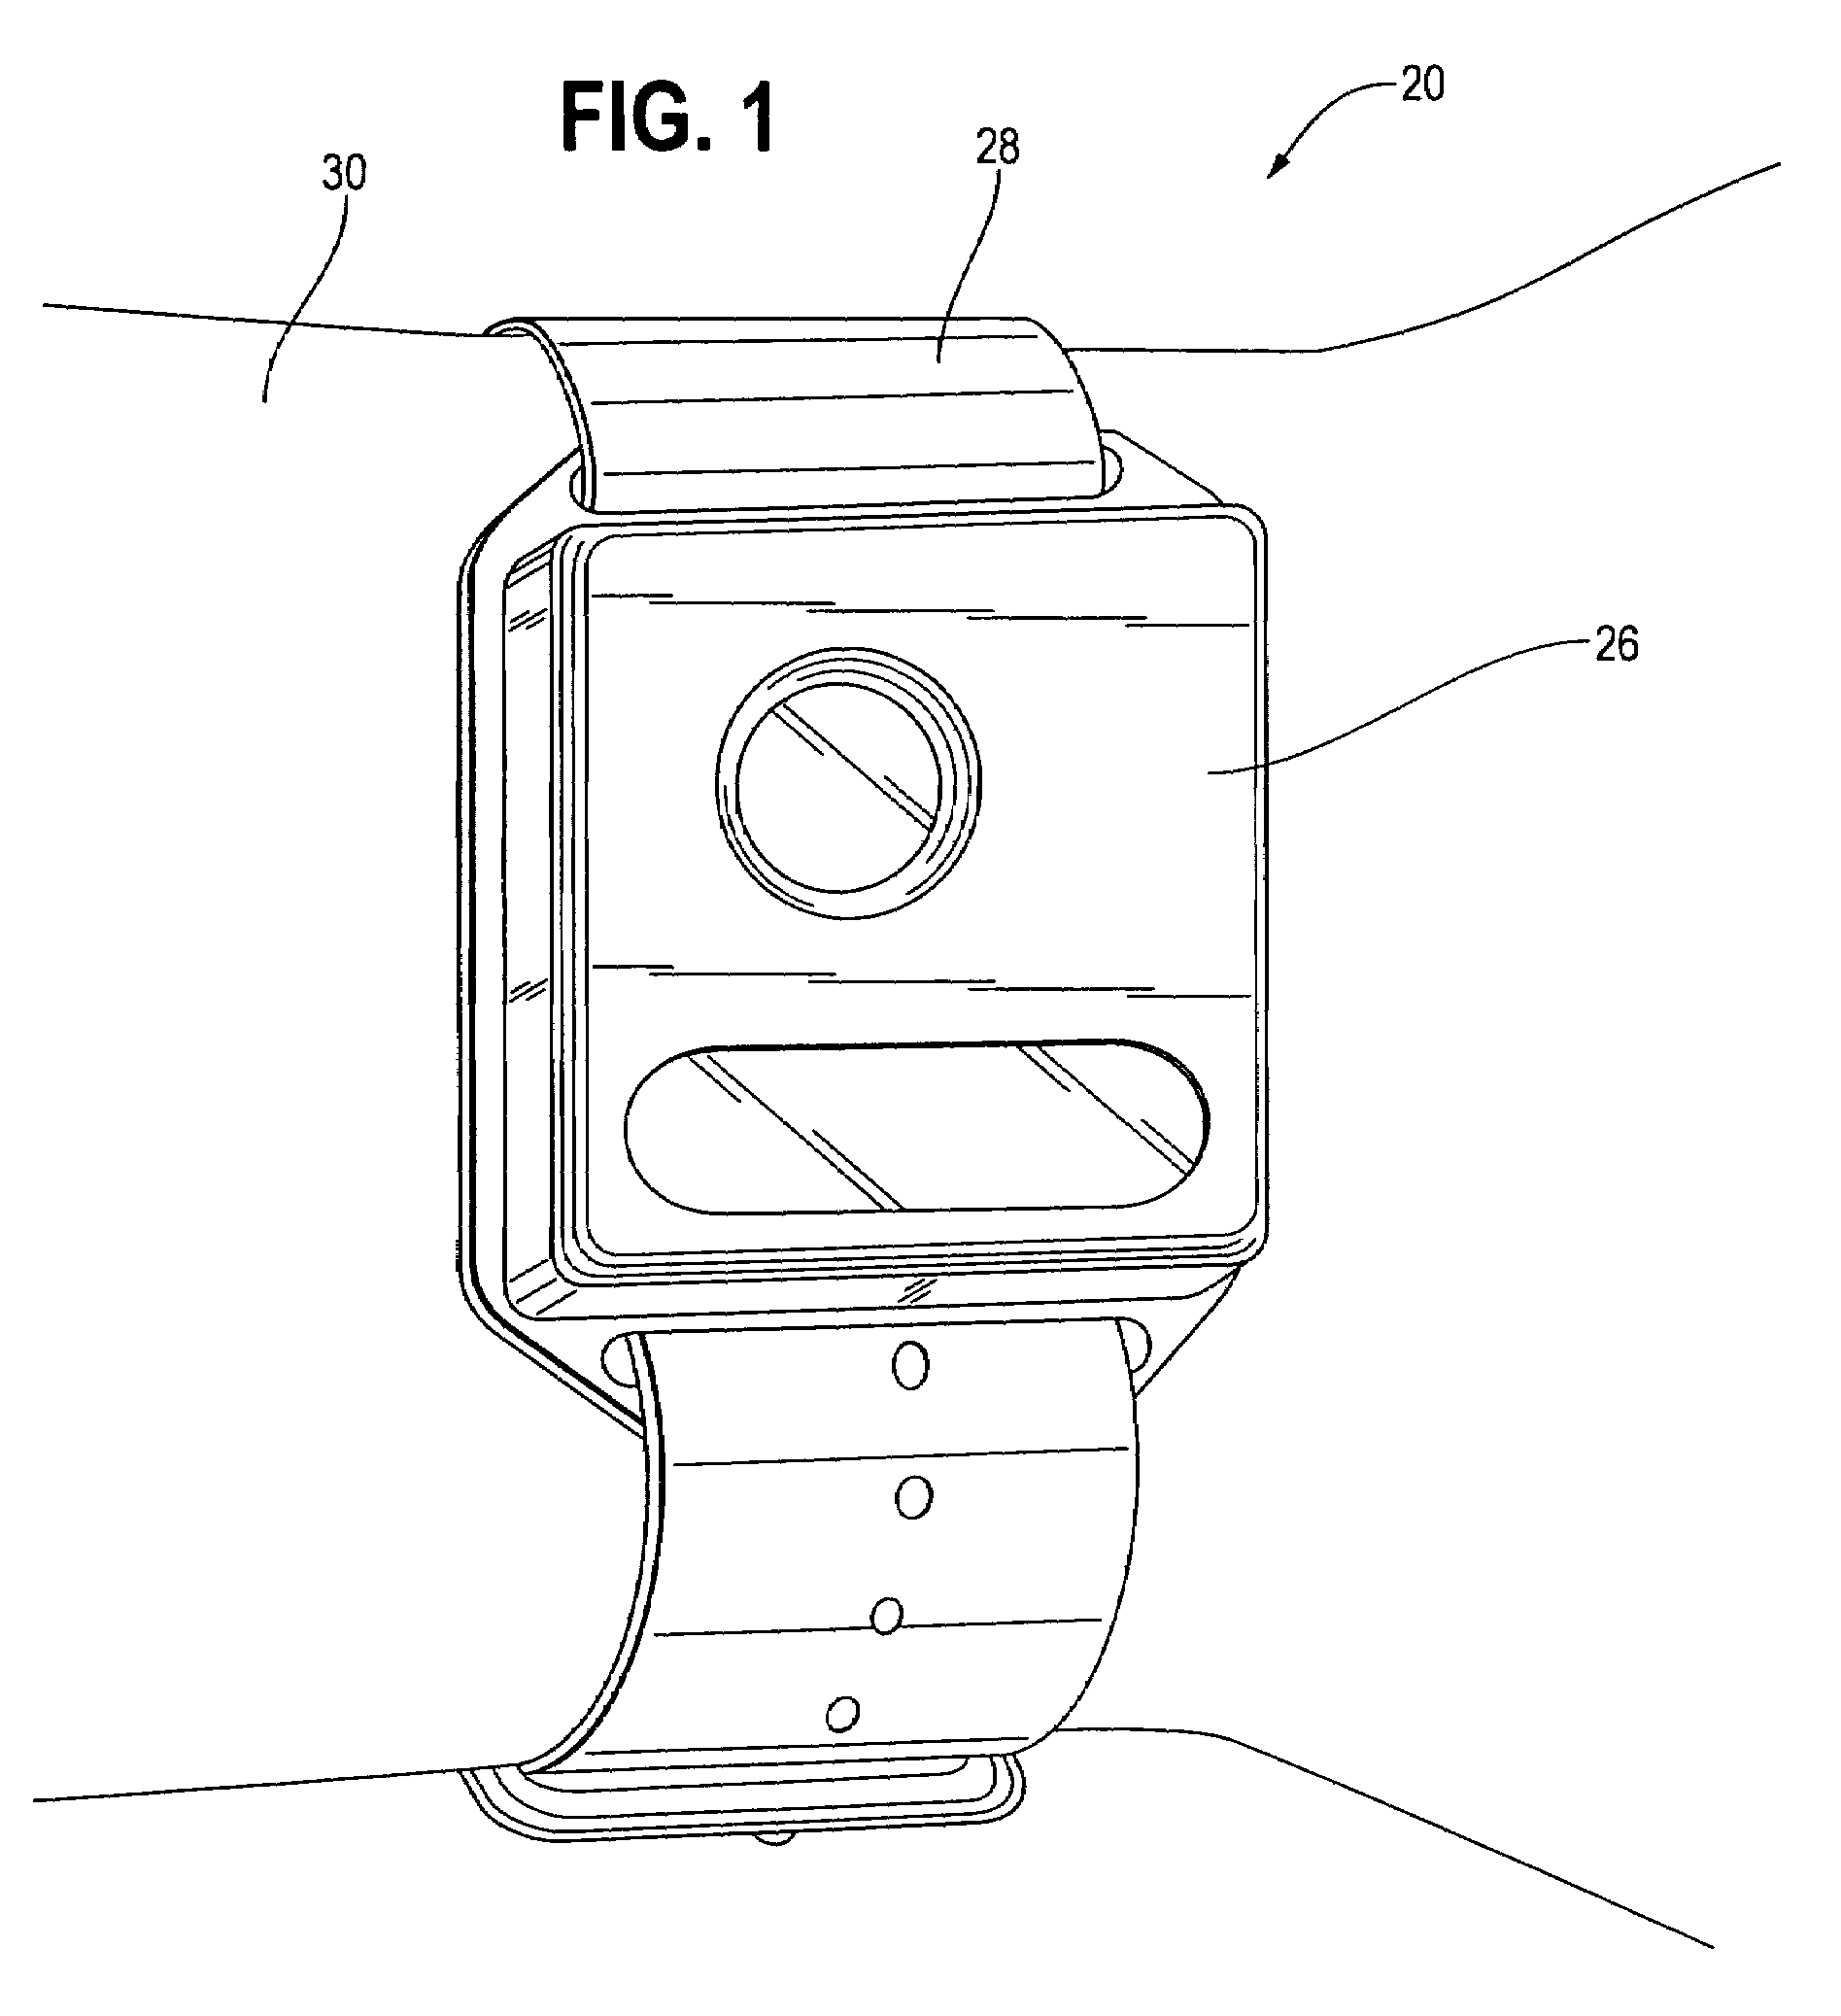 Automated system and method for determining drug testing